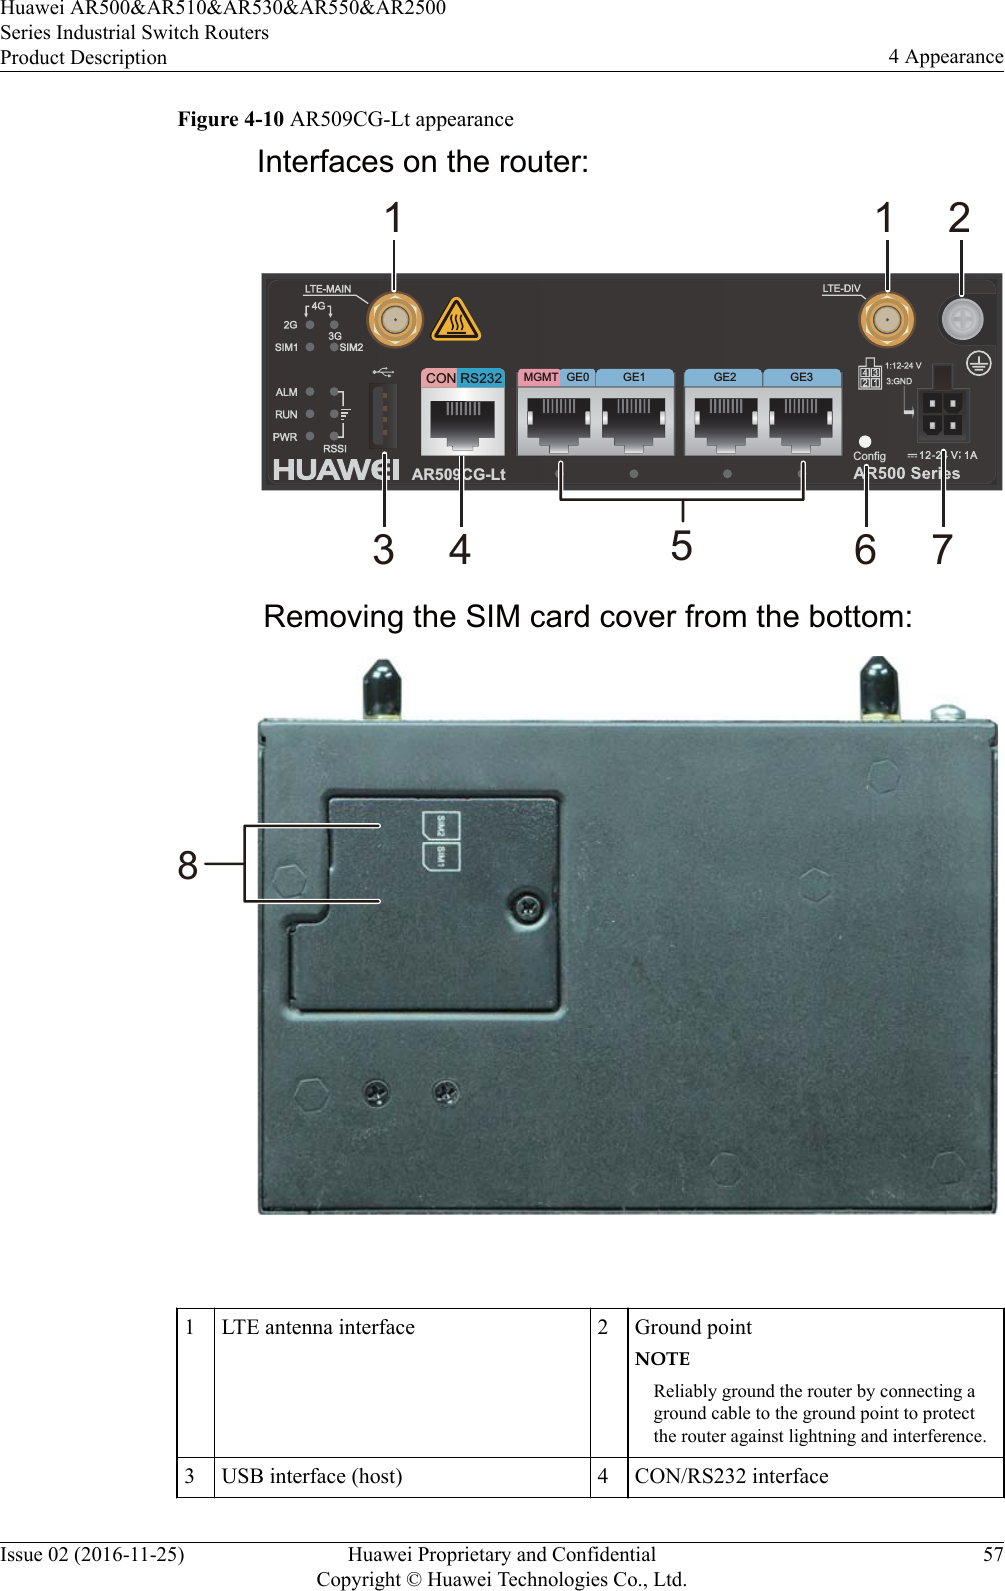 Figure 4-10 AR509CG-Lt appearanceConfigGE1MGMT GE0 GE3AR509CG-Lt653 41271CON RS232GE2Removing the SIM card cover from the bottom:Interfaces on the router:8 1LTE antenna interface 2 Ground pointNOTEReliably ground the router by connecting aground cable to the ground point to protectthe router against lightning and interference.3 USB interface (host) 4 CON/RS232 interfaceHuawei AR500&amp;AR510&amp;AR530&amp;AR550&amp;AR2500Series Industrial Switch RoutersProduct Description 4 AppearanceIssue 02 (2016-11-25) Huawei Proprietary and ConfidentialCopyright © Huawei Technologies Co., Ltd.57